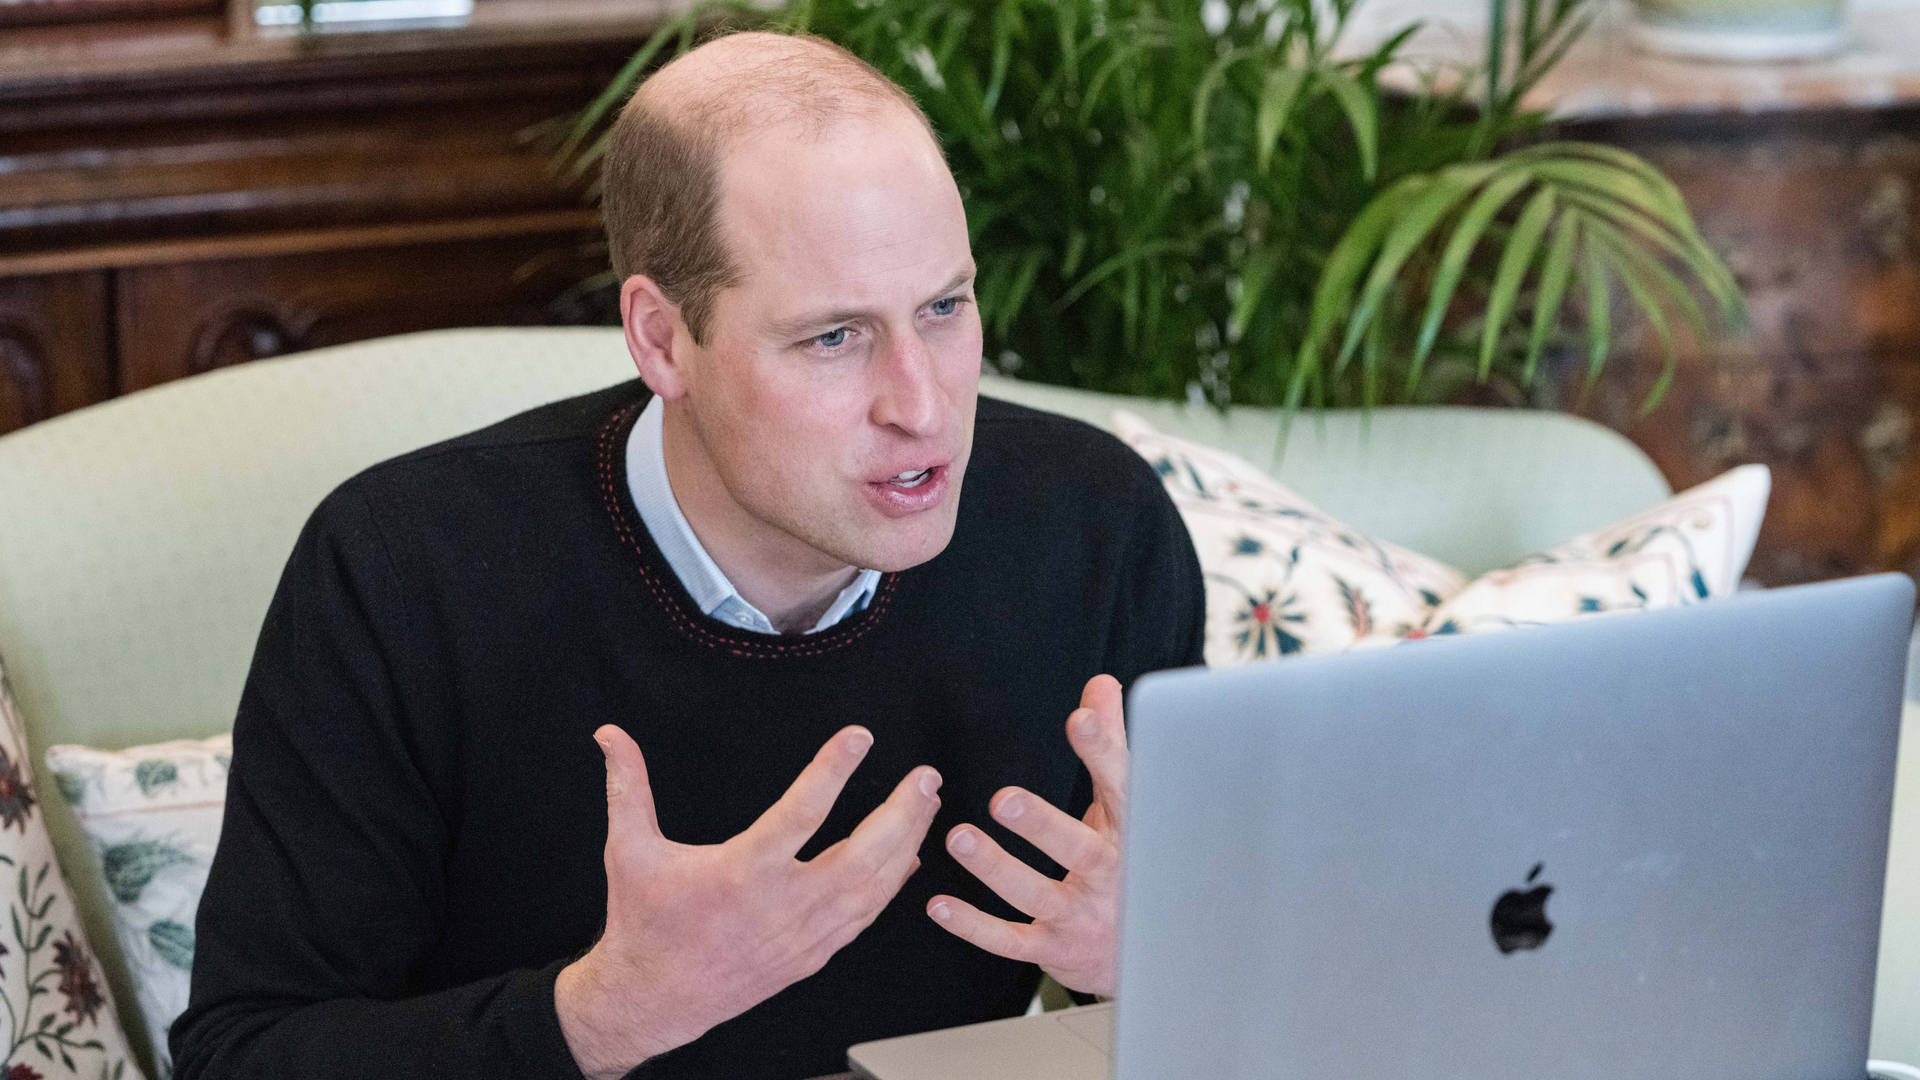 Prince William With Macbook